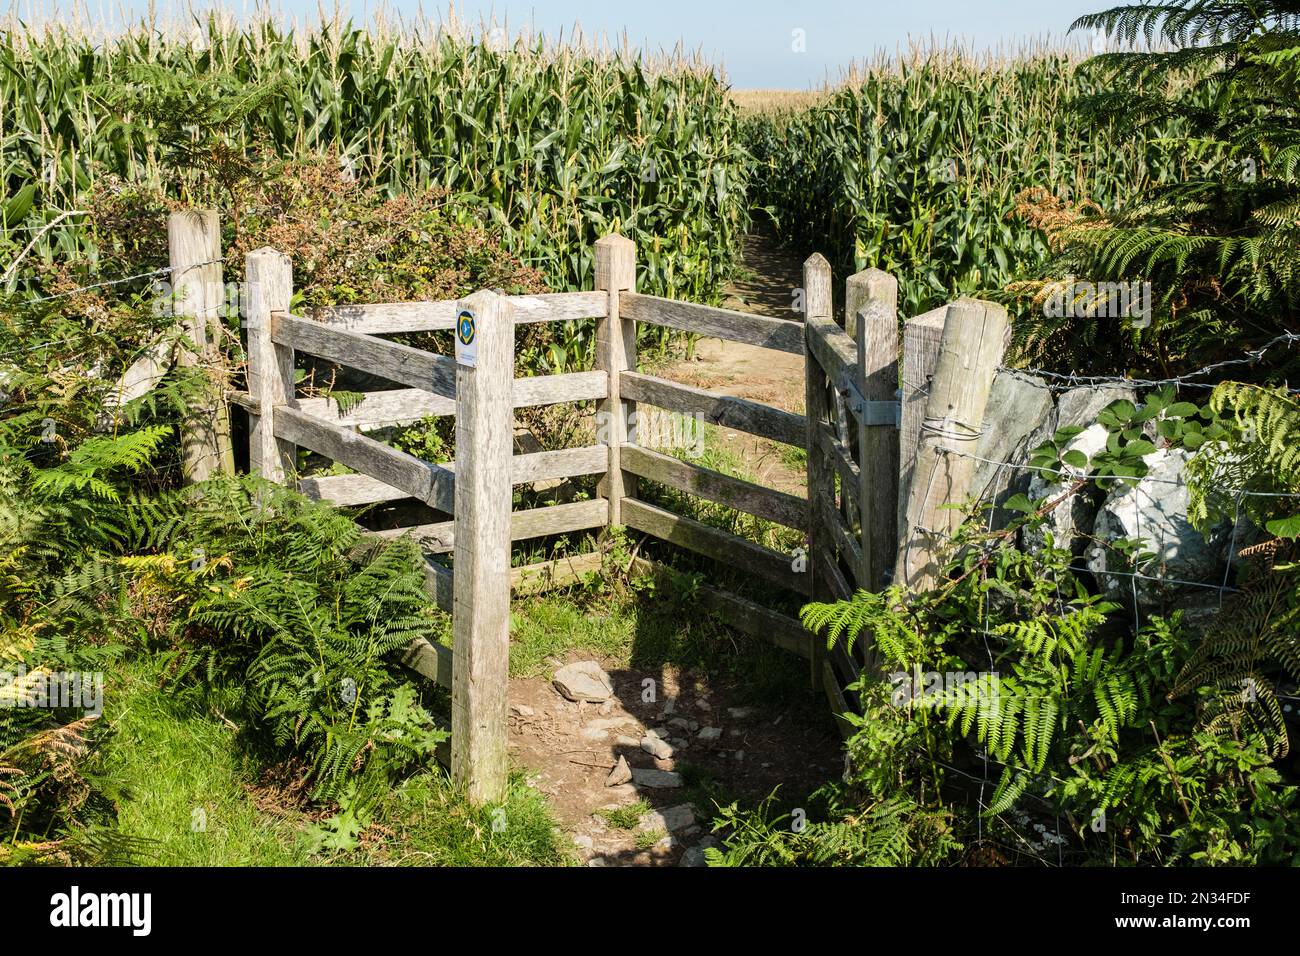 Kissing gate and public footpath on Coastal Path route through Maize crop field. Llanfachraeth, Isle of Anglesey, north Wales, UK, Britain Stock Photo